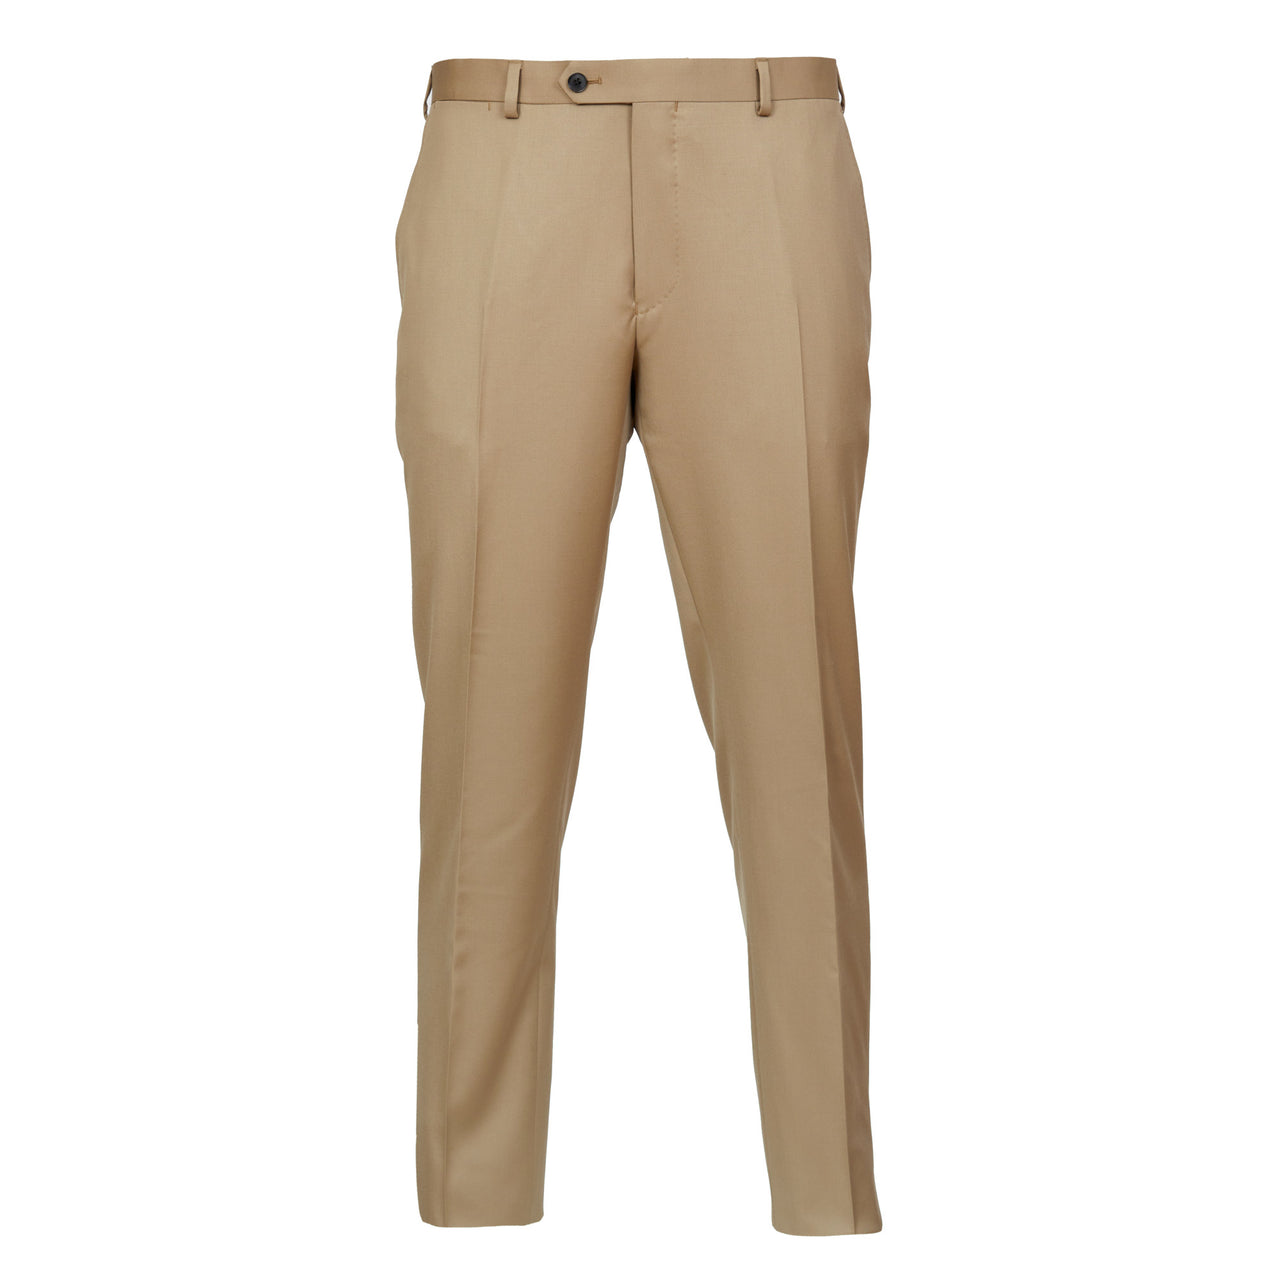 HENRY SARTORIAL Flat Front Wool Trousers CAMEL REG